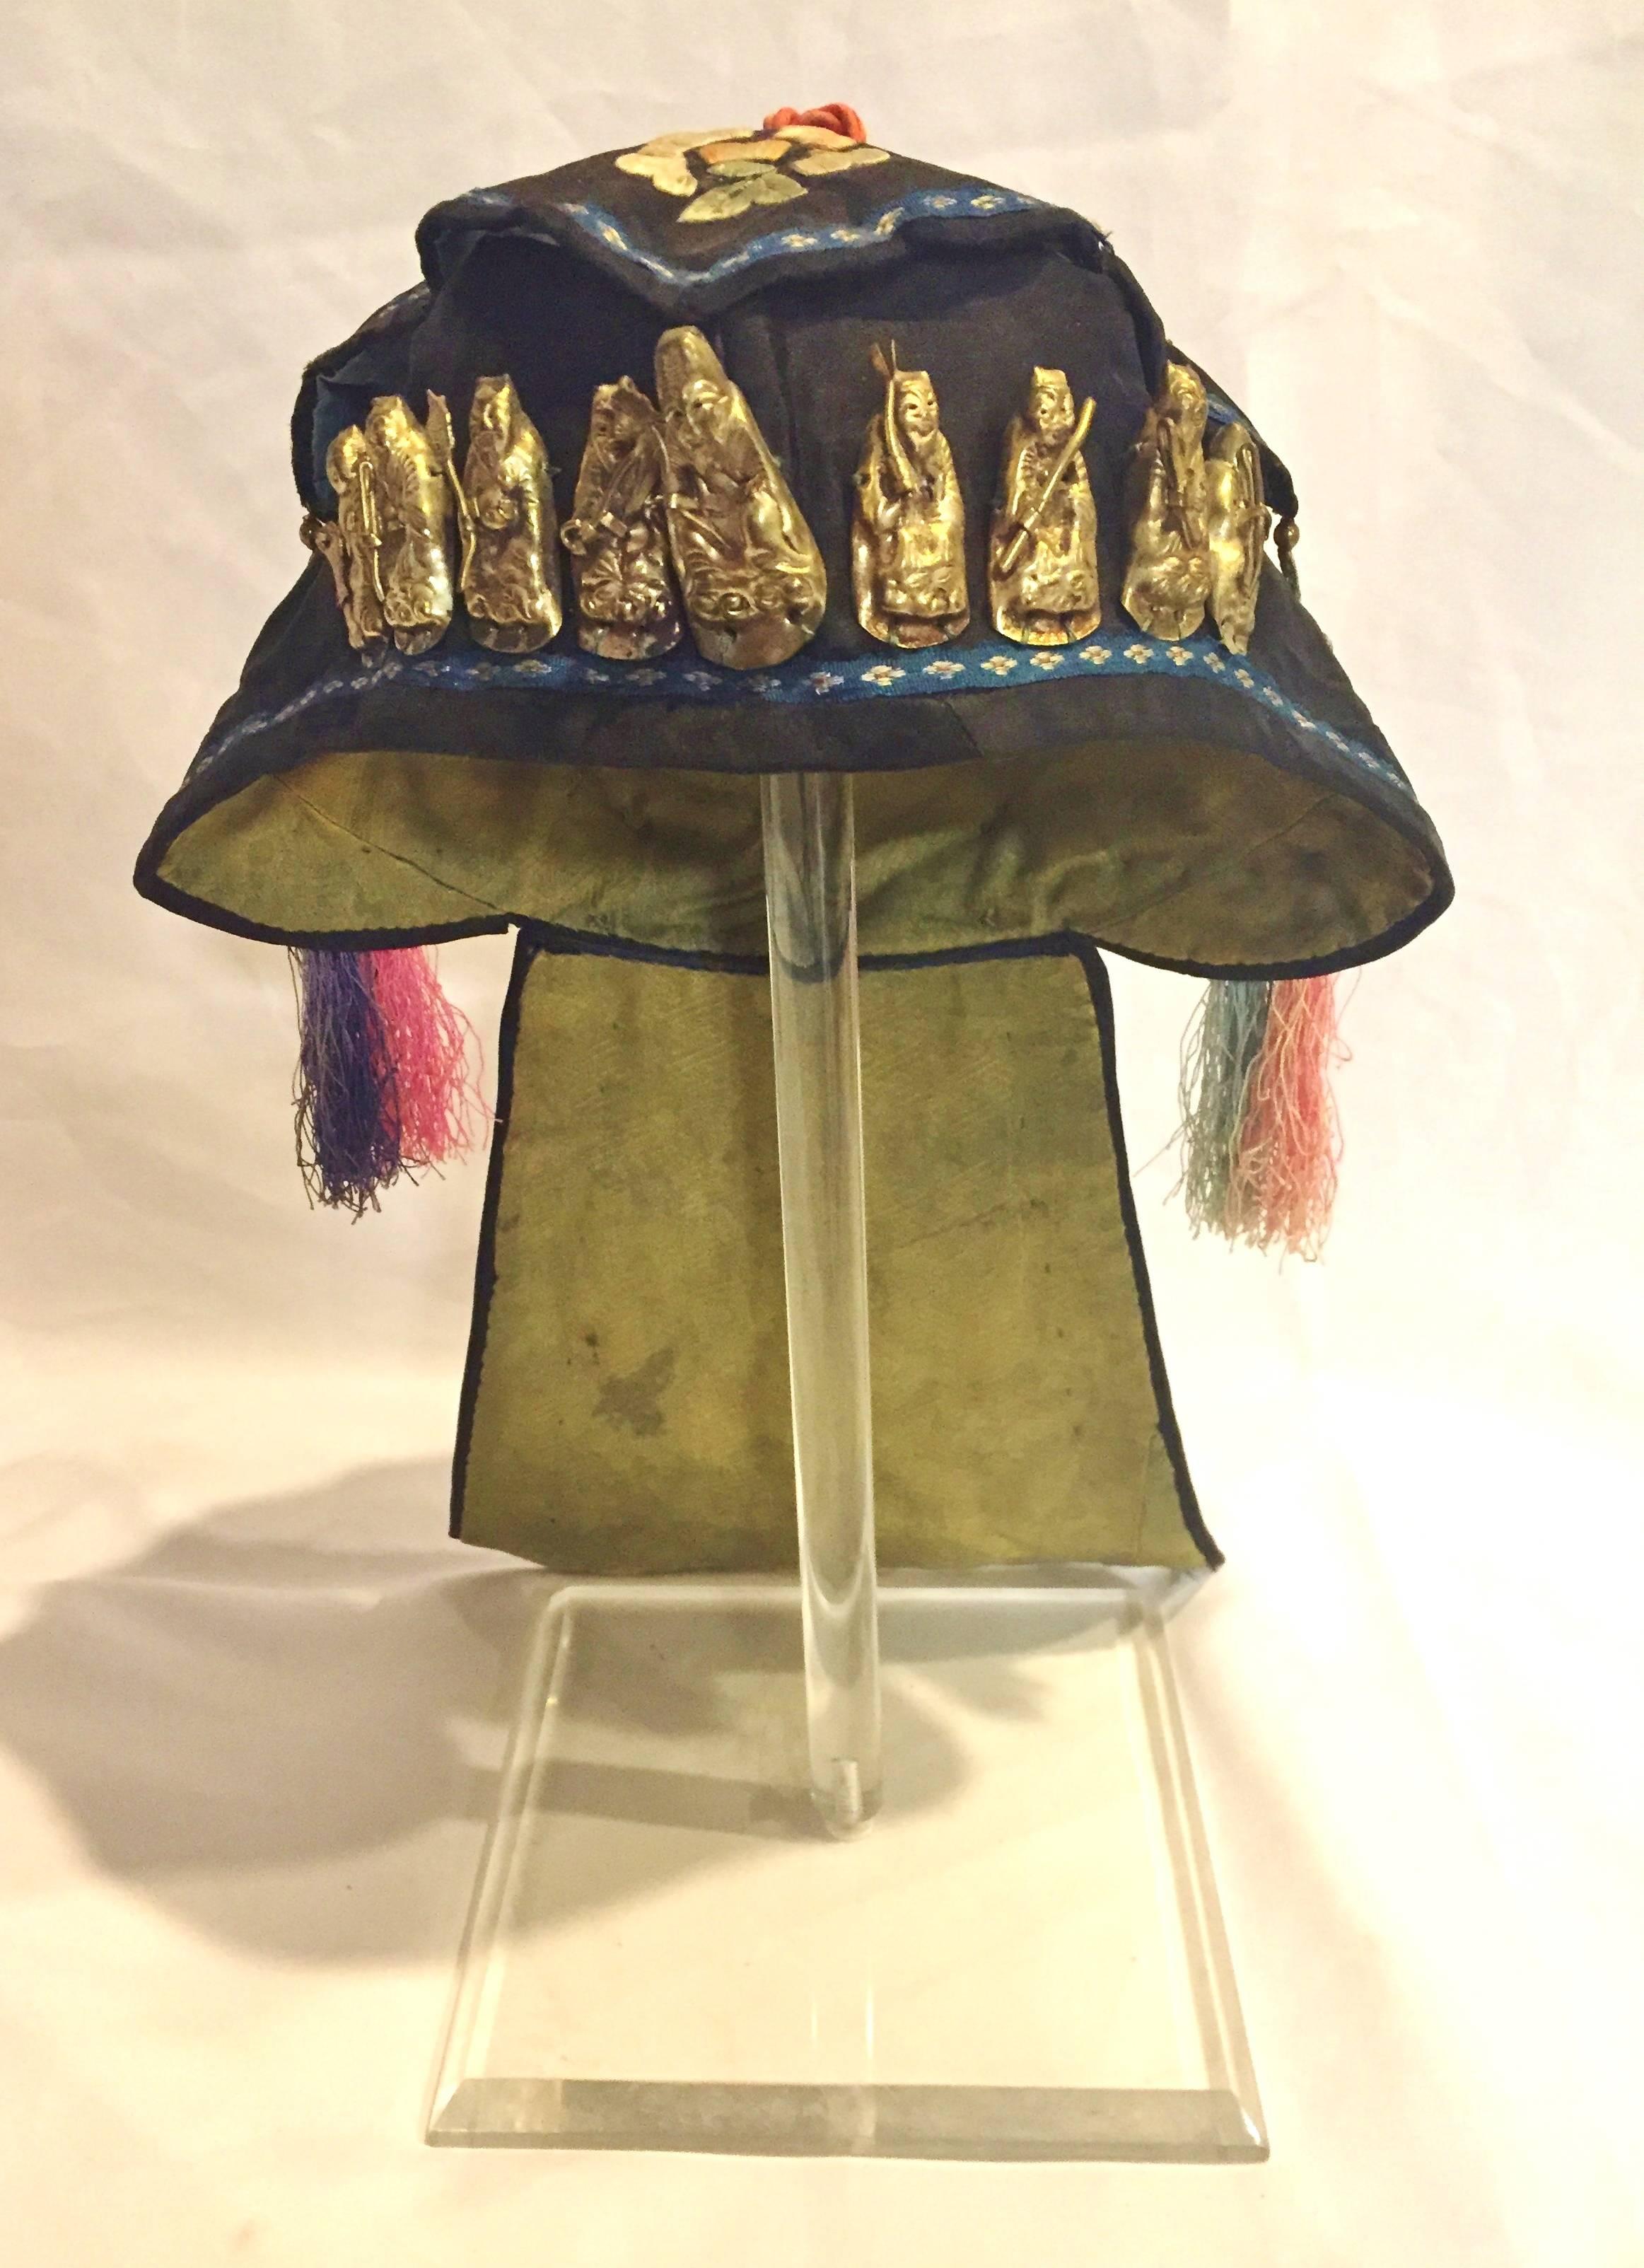 An antique silk embroidered hat with full set of silver ornaments. This exquisite hat belonged to a wealthy family's little prince. It is finely embroidered with peonies, which are symbols of prosperity. Two pairs of silk tassels decorate the sides